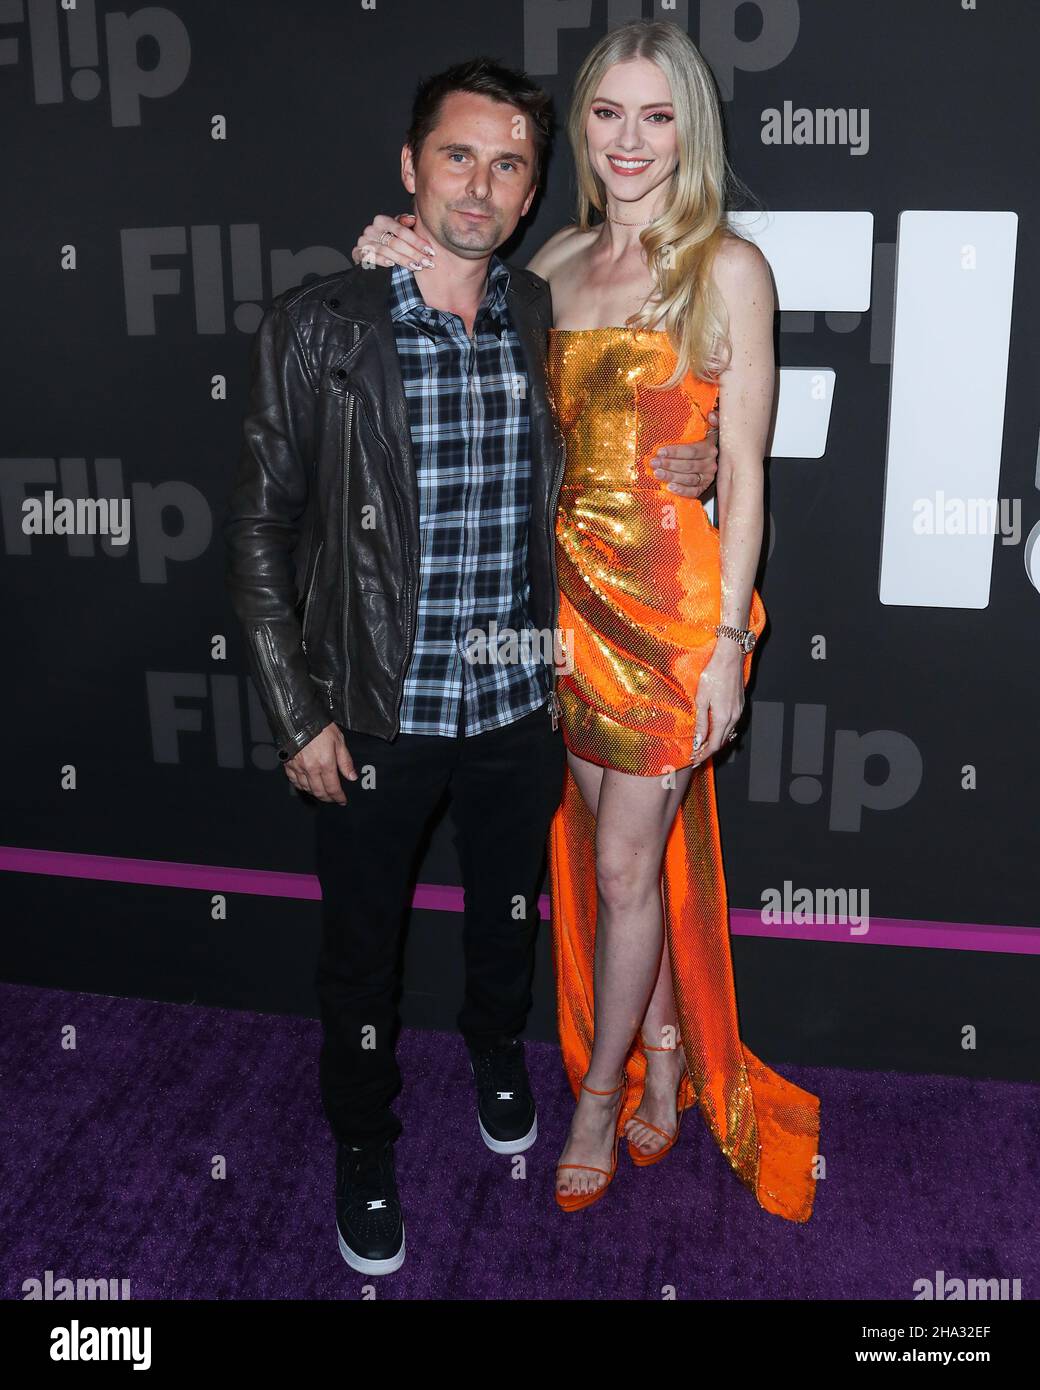 HOLLYWOOD, LOS ANGELES, CALIFORNIA, USA - DECEMBER 09: Singer Matt Bellamy and wife/model Elle Evans Bellamy arrive at the Flip Grand Launch Event Hosted by Grammy-Nominated Artist Halsey with Performances by Scout Willis, BIA, and Kehlani held at Avalon Hollywood on December 9, 2021 in Hollywood, Los Angeles, California, United States. (Photo by Xavier Collin/Image Press Agency/Sipa USA) Stock Photo